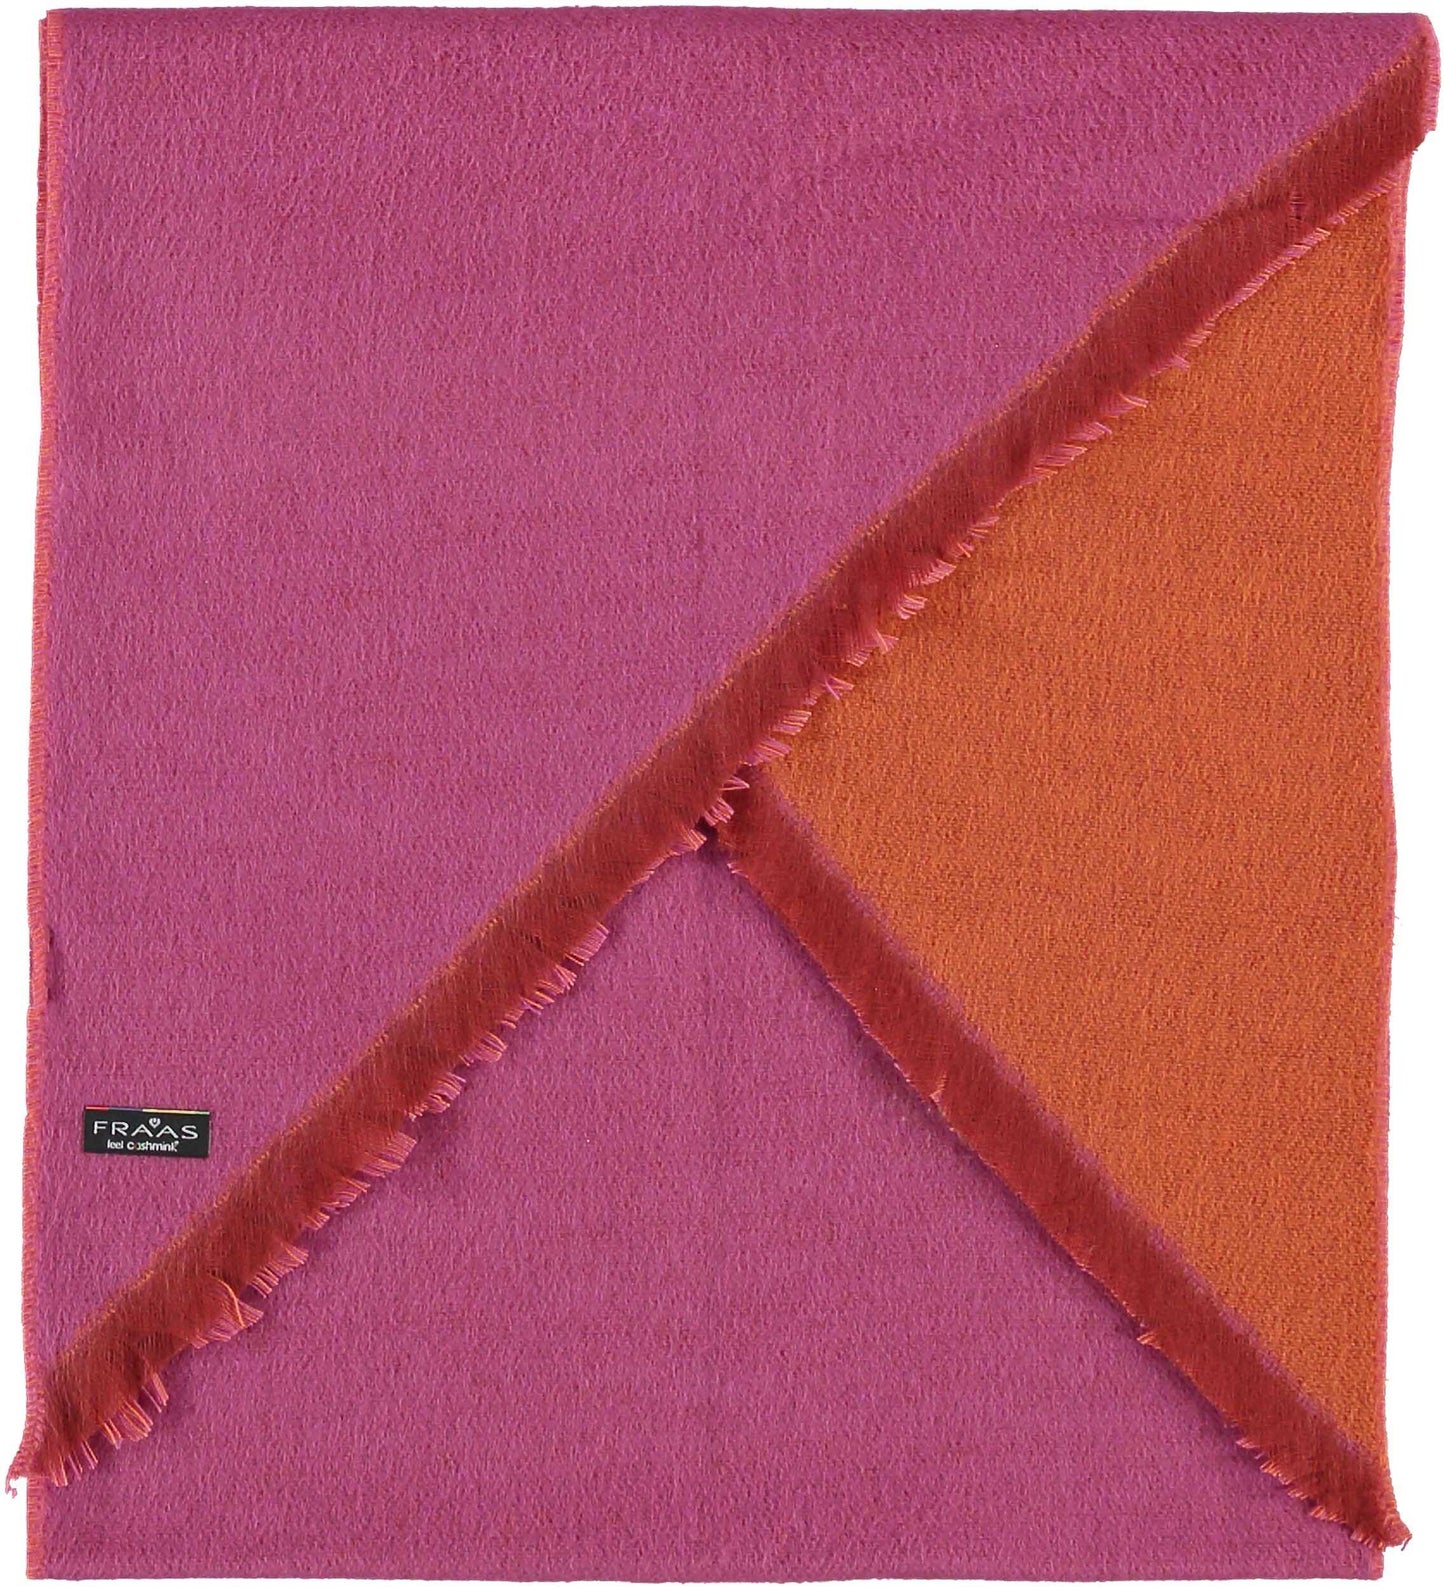 FRAAS Sustainability Edition Reversible Solid Bias Scarf